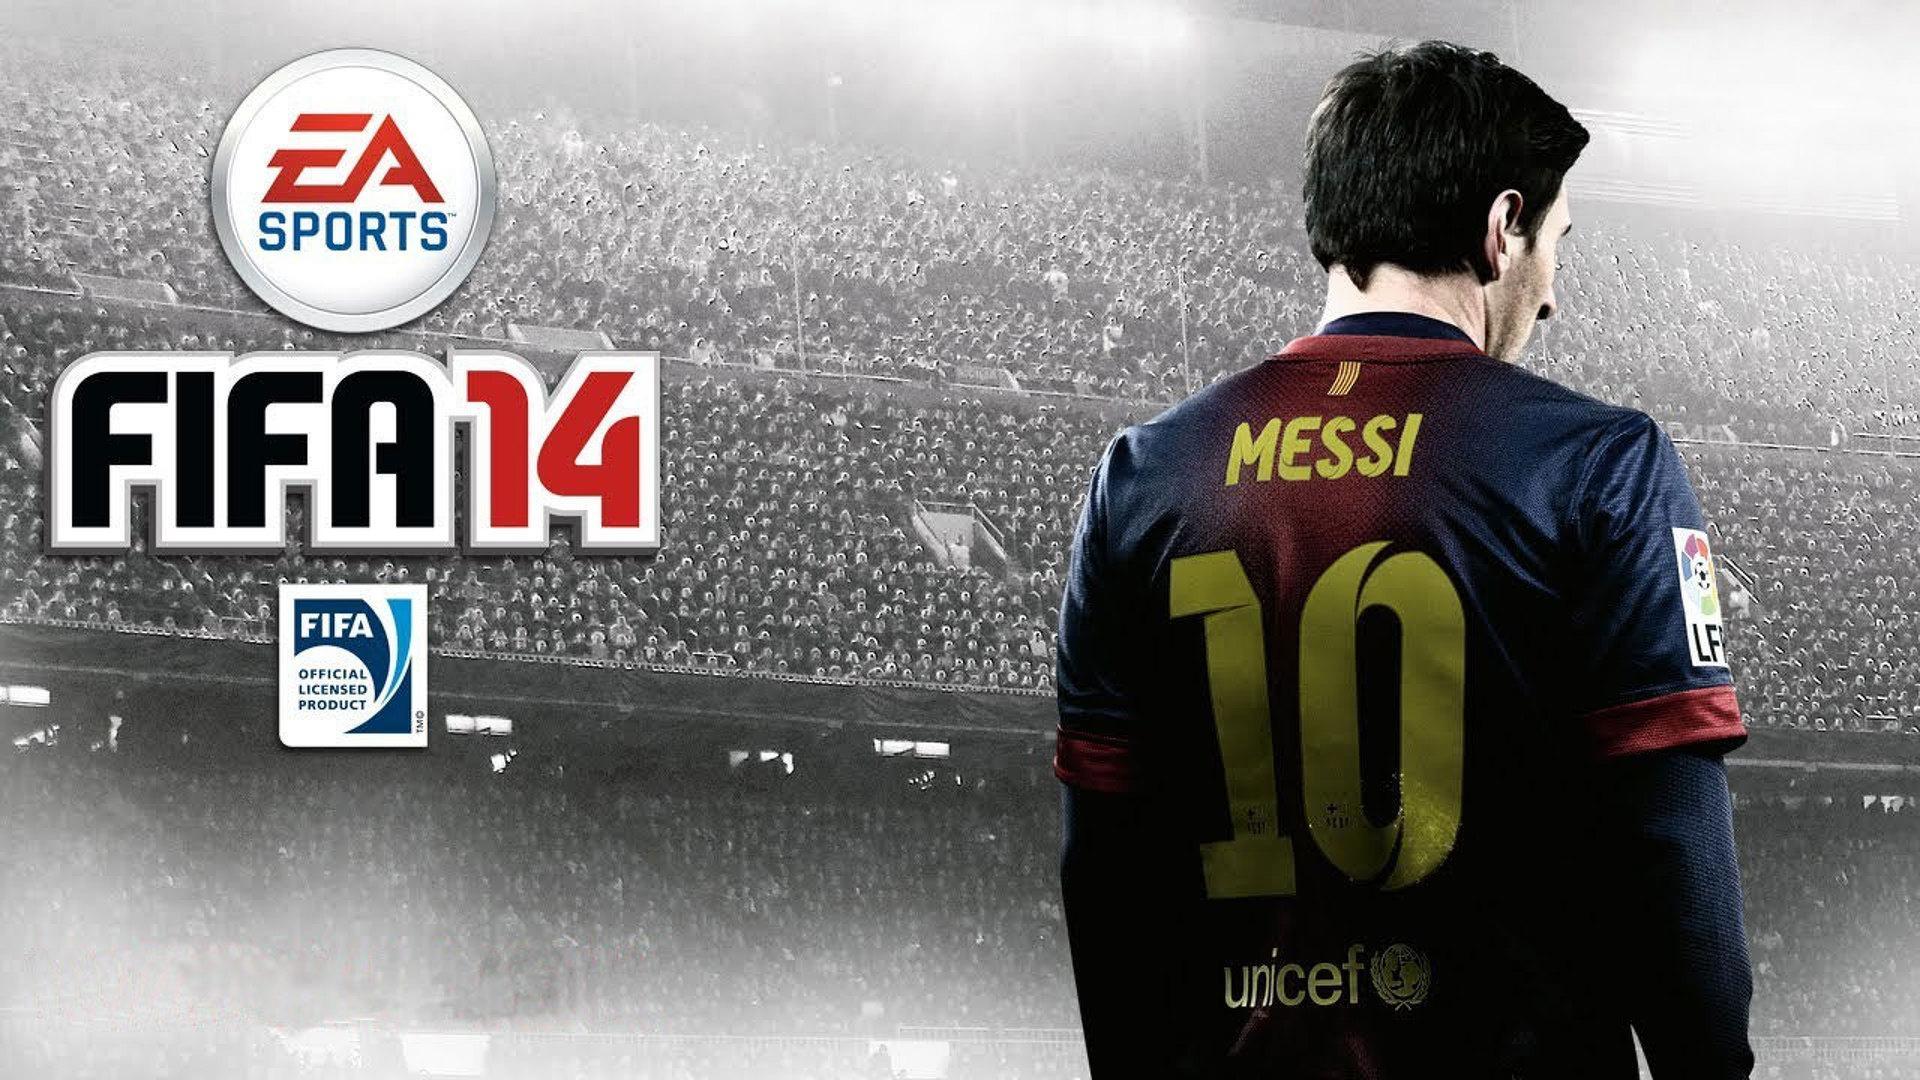 FIFA 14 PS5 Version Full Game Free Download